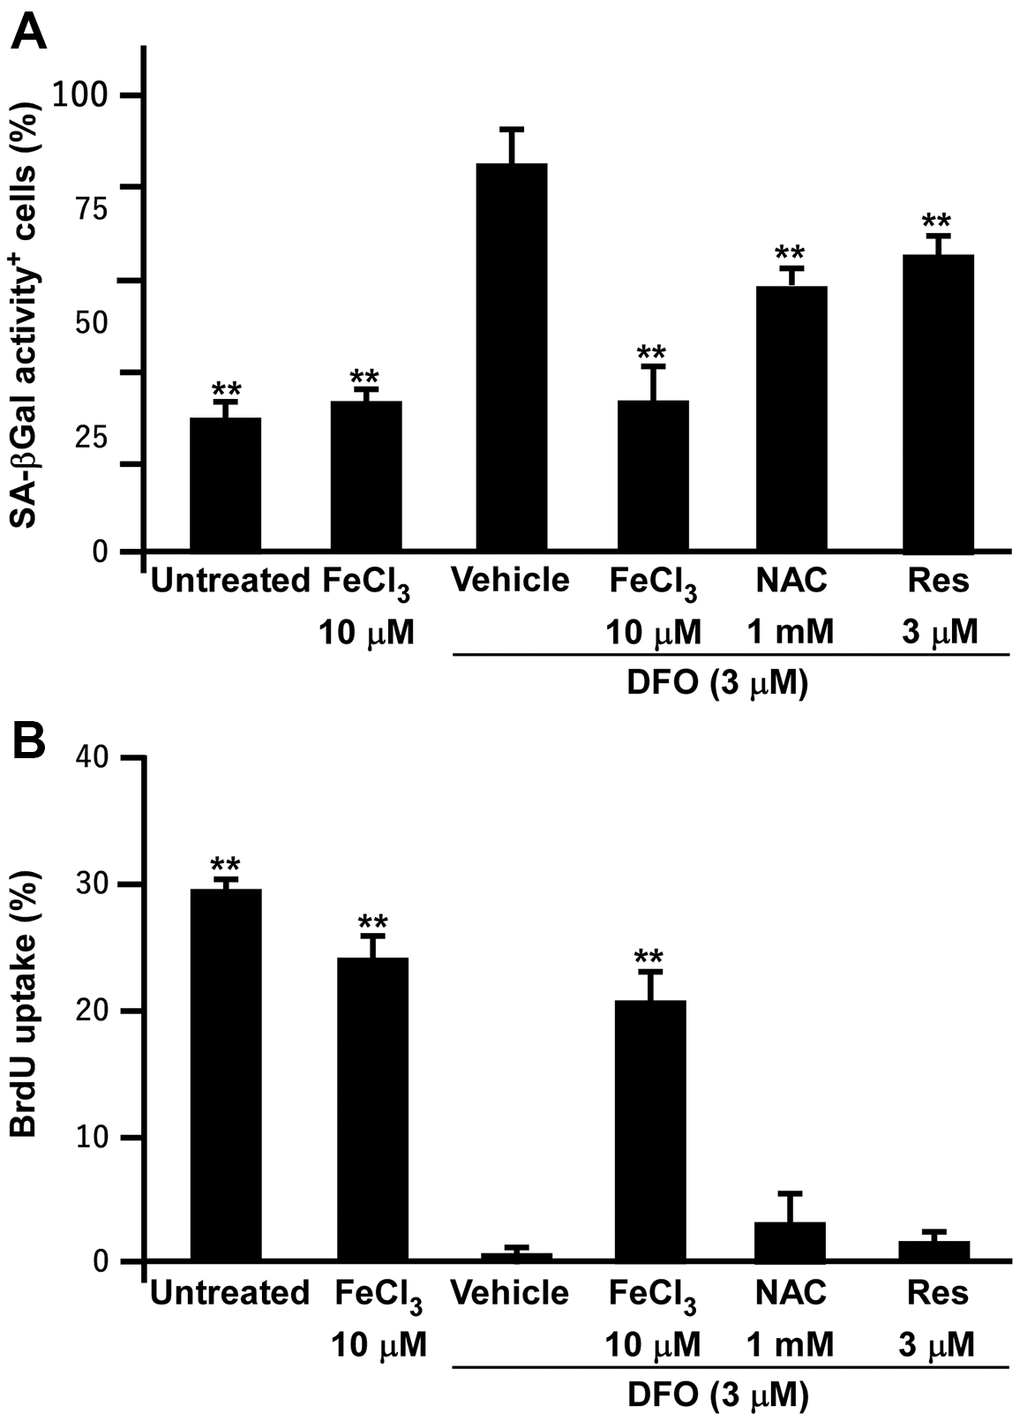 FeCl3 but not antioxidant rescues the DFO-induced senescent phenotypes and proliferation inhibition. (A) SA-βGal activity assay of EPCs. EPCs were treated with FeCl3 or DFO (3 μM) plus FeCl3, N-acetylcysteine (NAC), and Resveratrol (Res) as indicated concentrations for 4 days. (B) Iron but not antioxidants rescued DFO-induced proliferation inhibition. EPCs were treated with FeCl3 or DFO plus FeCl3 and antioxidants as described in (A). ** Compared with vehicle, P 